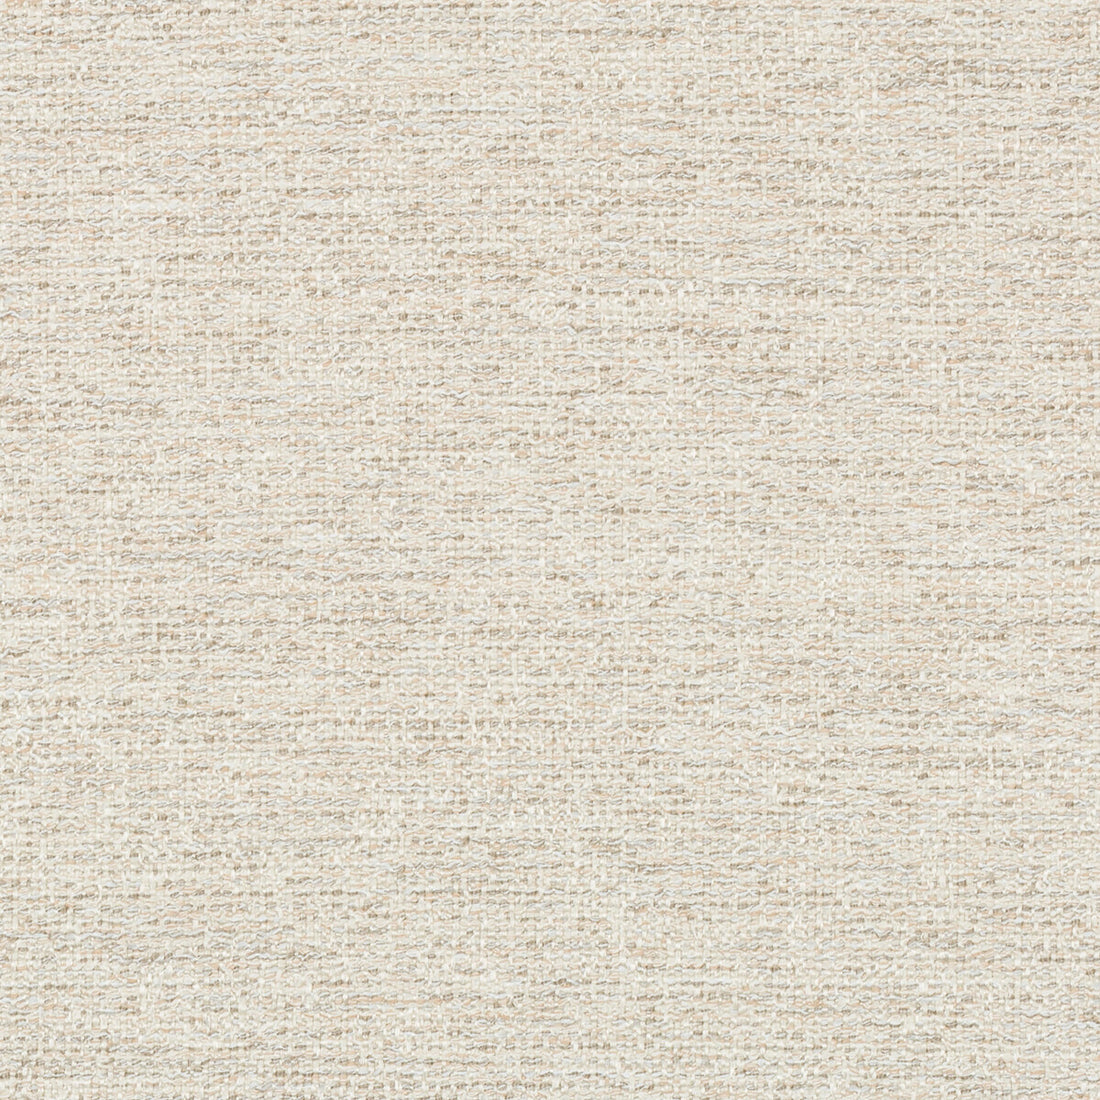 Kravet Couture fabric in 35922-111 color - pattern 36603.111.0 - by Kravet Couture in the Mabley Handler collection